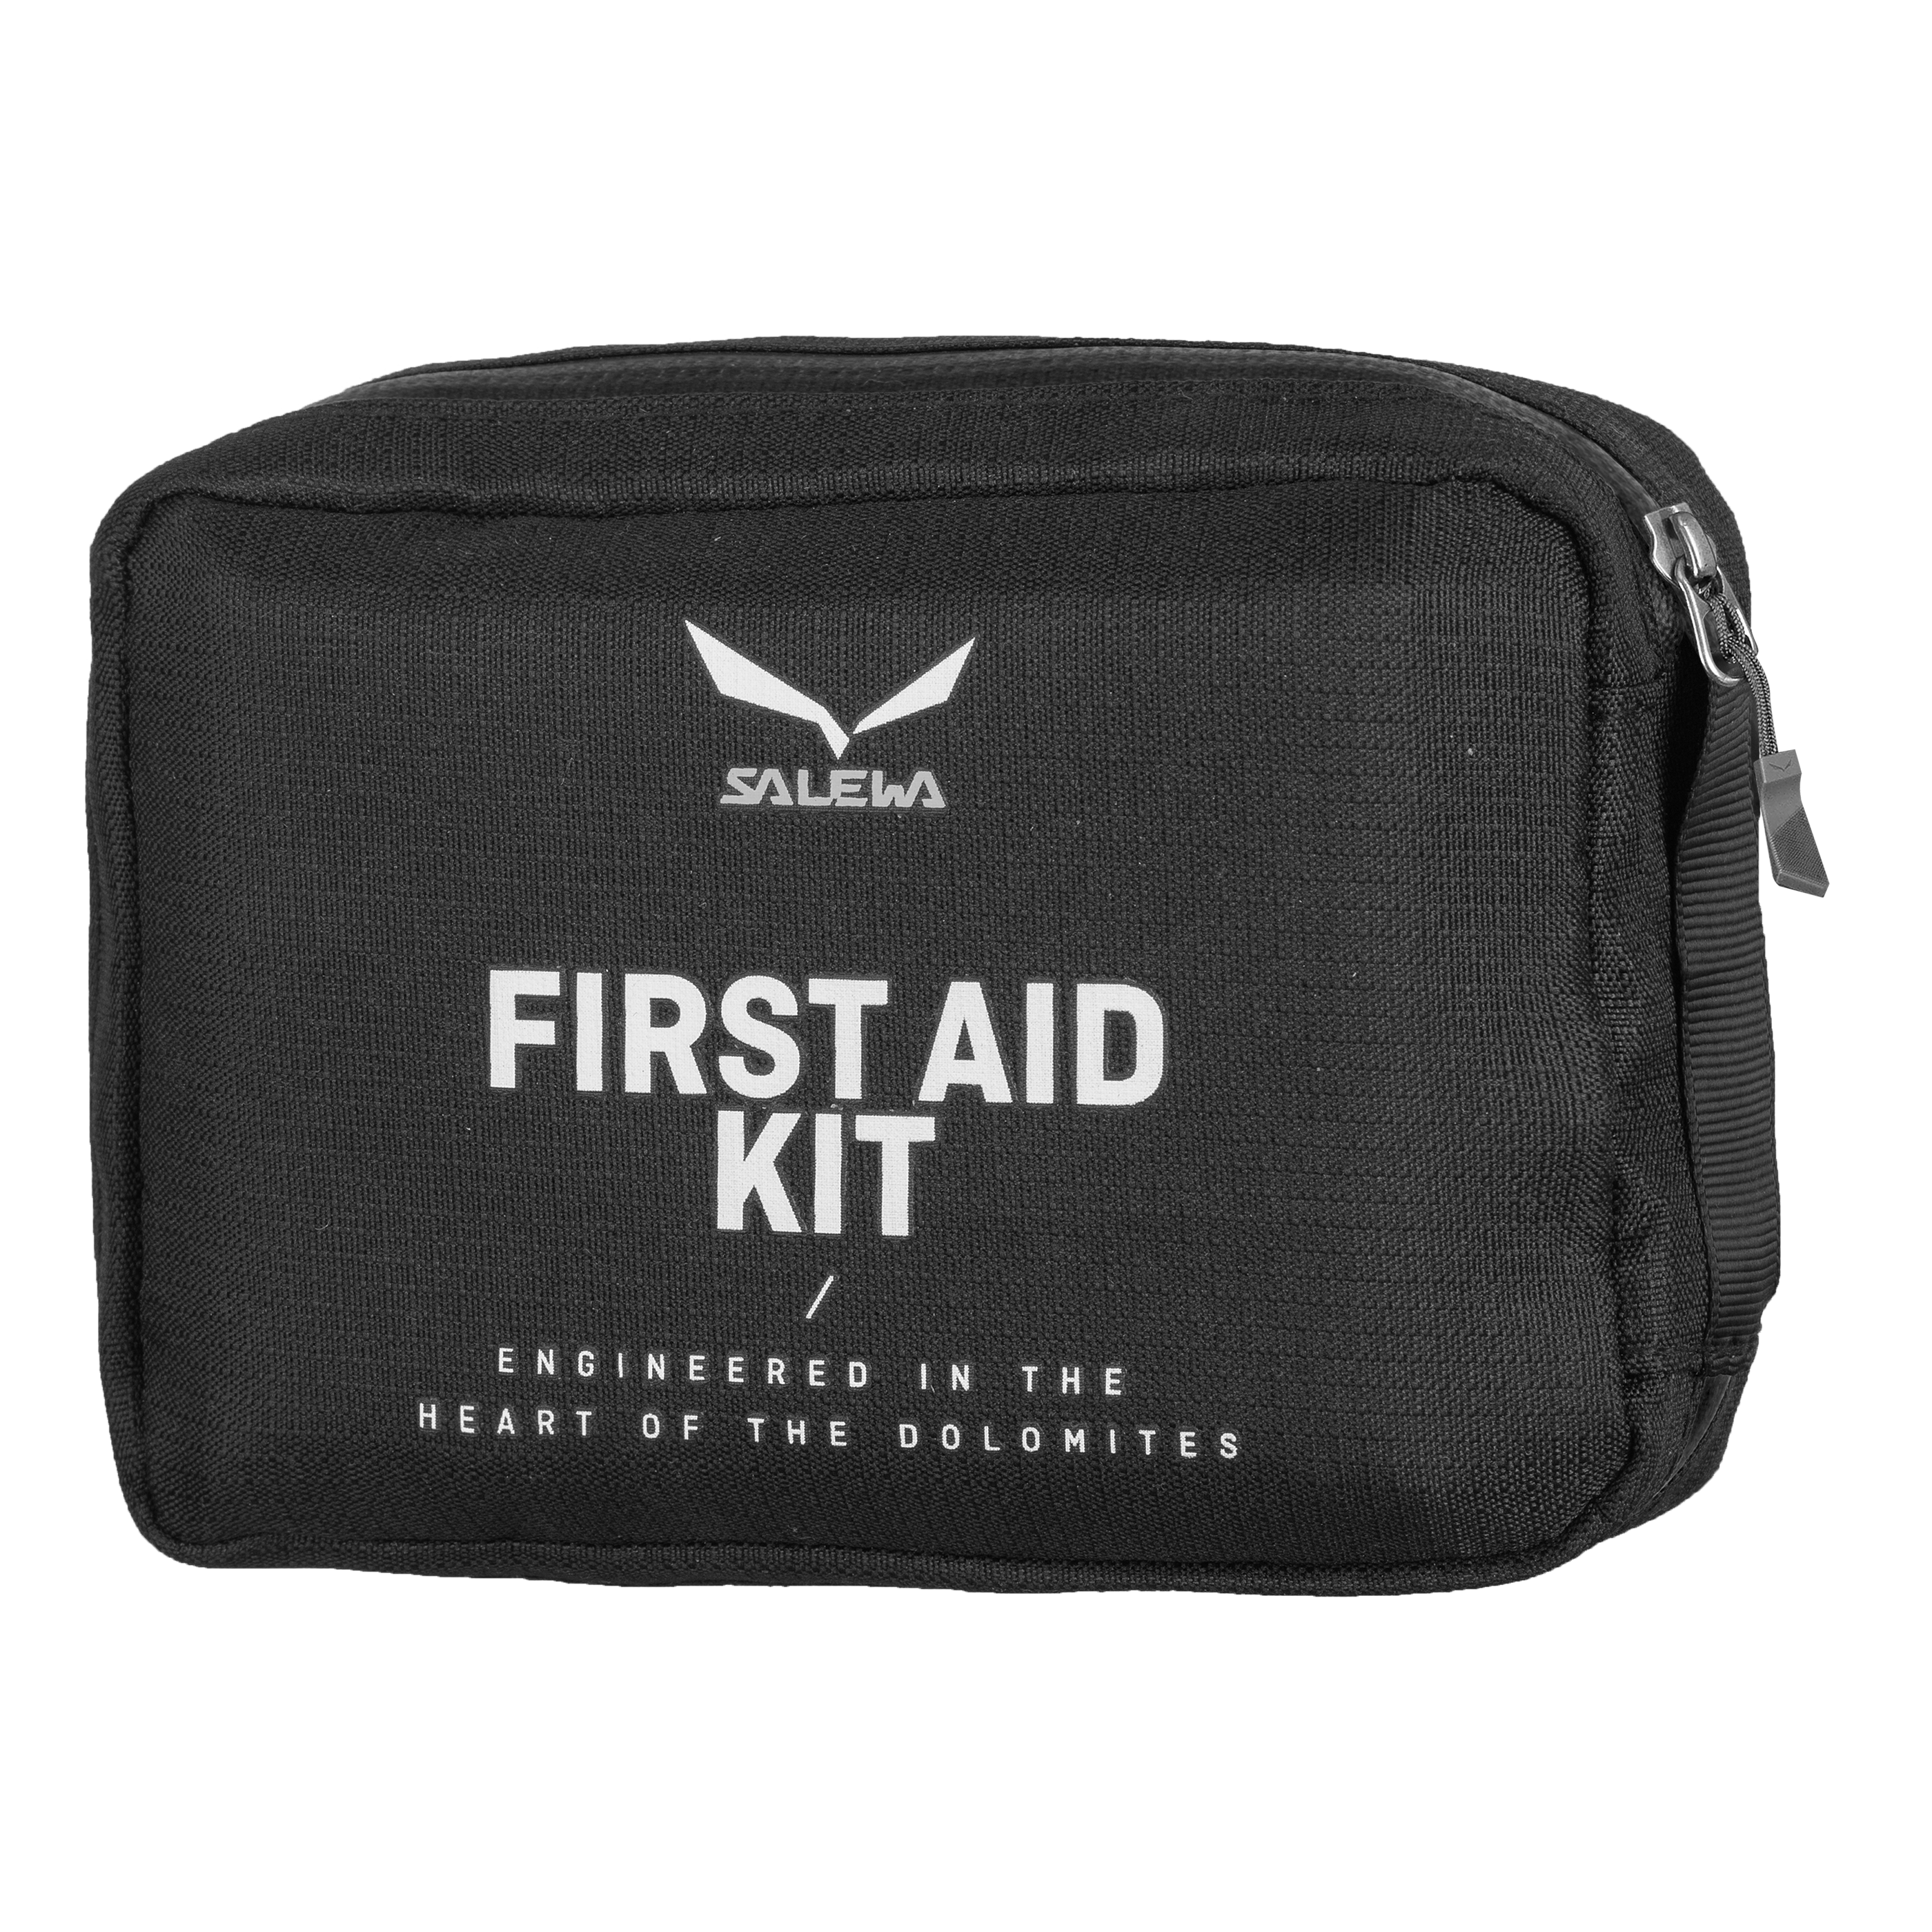 FIRST AID KIT OUTDOOR